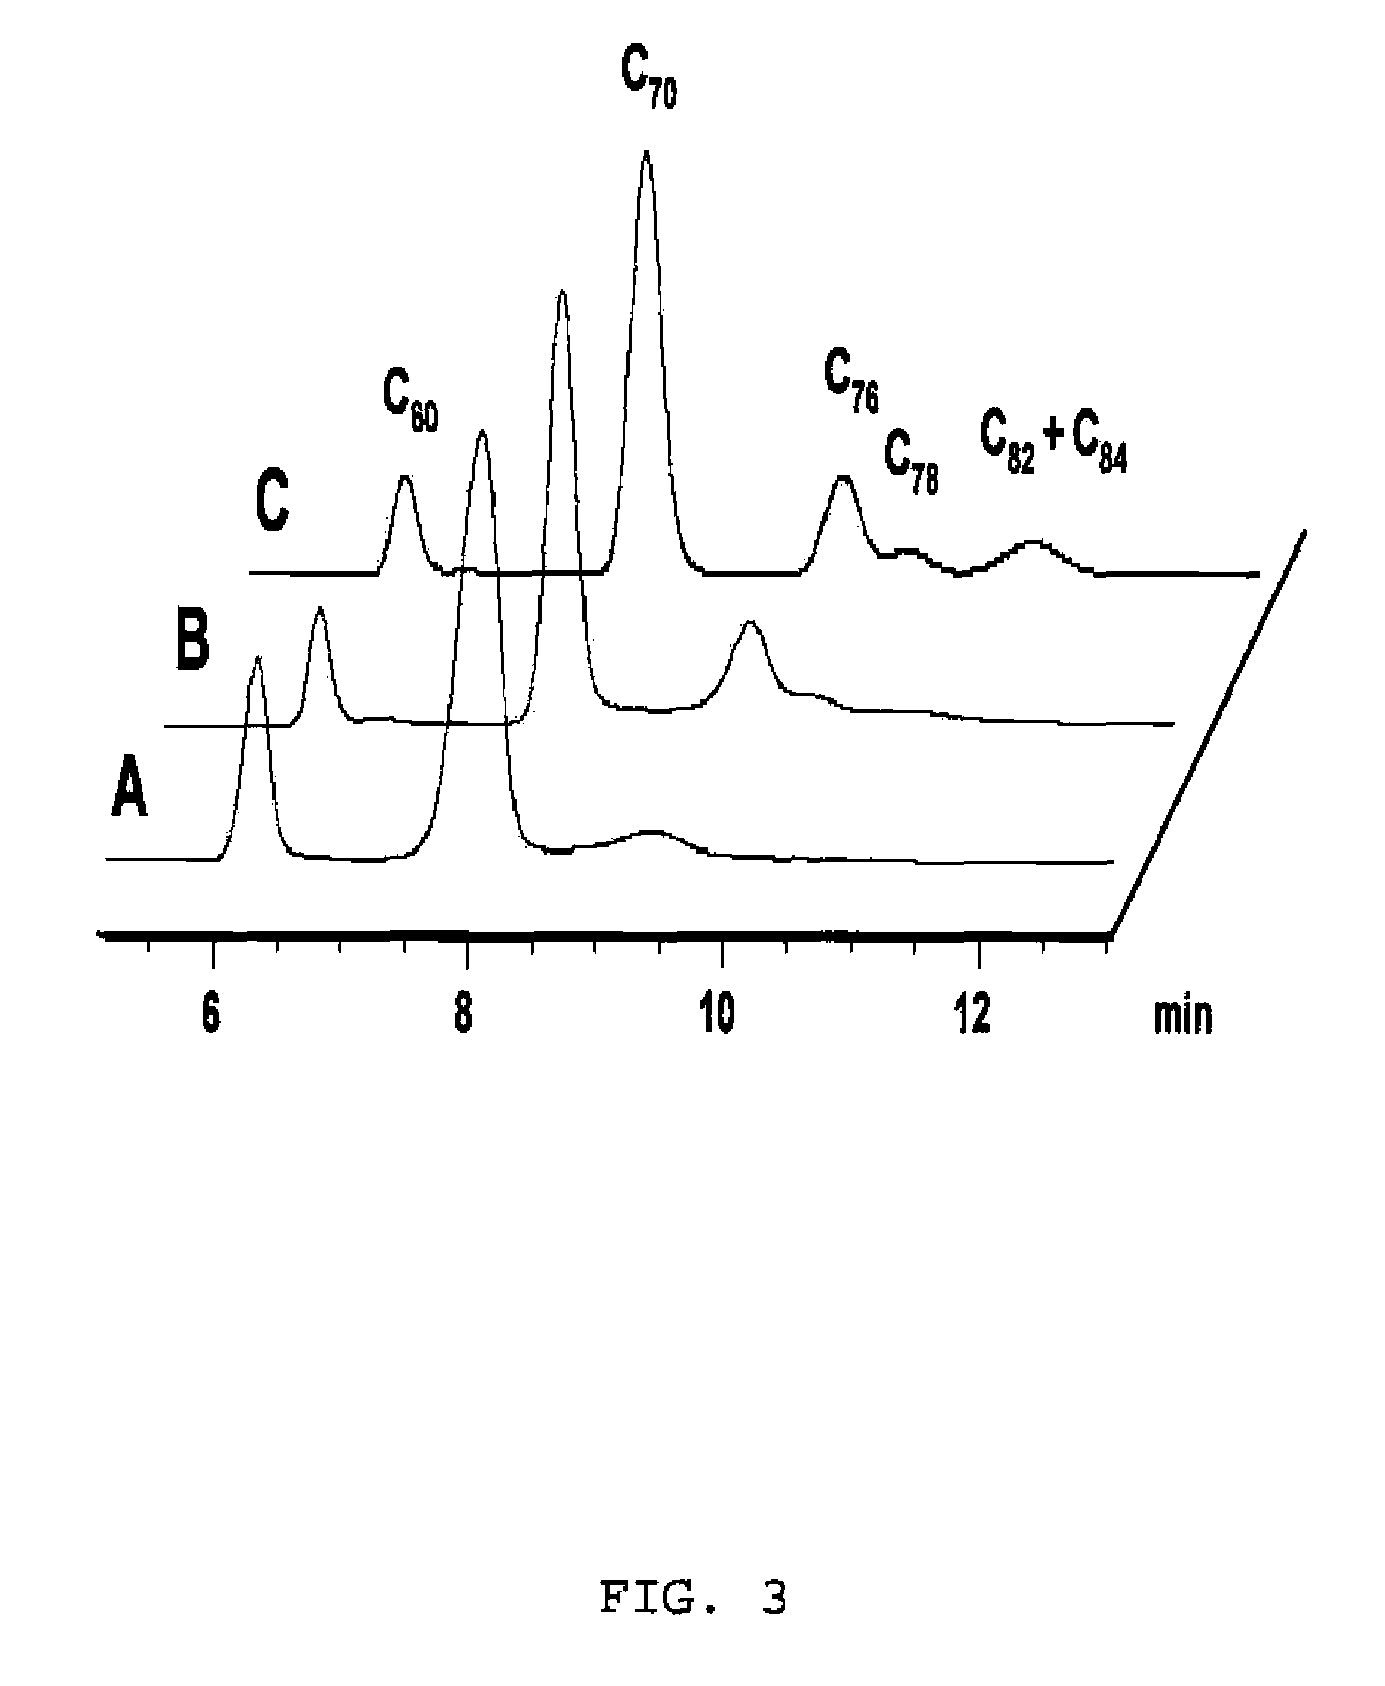 Compound and method for the selective extraction of higher fullerenes from mixtures of fullerenes